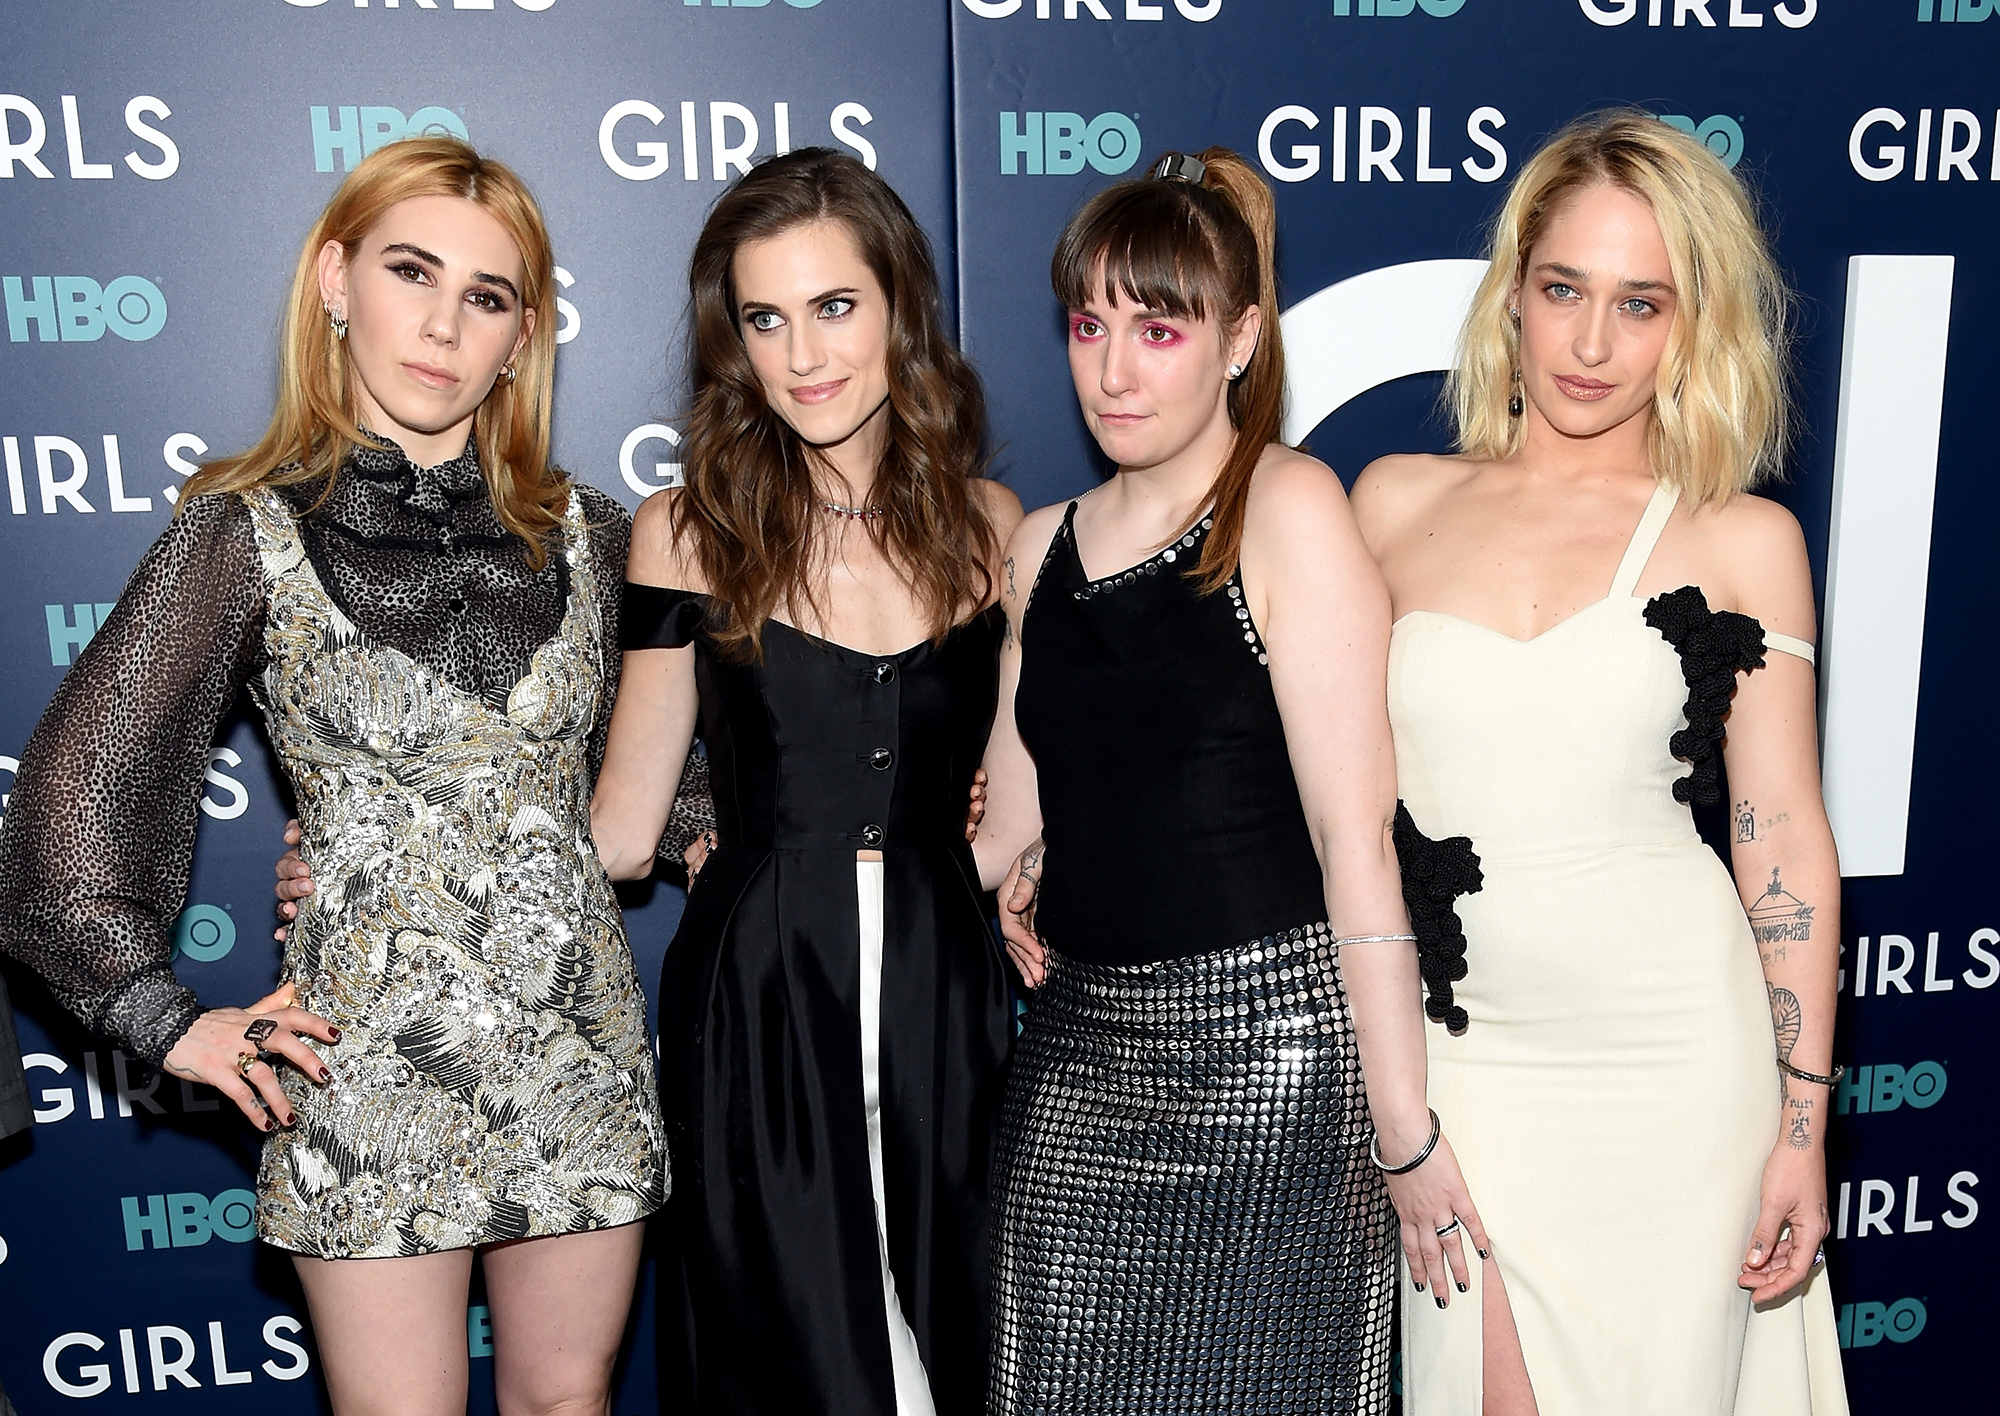 The New York Premiere Of The Sixth &amp; Final Season Of "Girls" - Arrivals